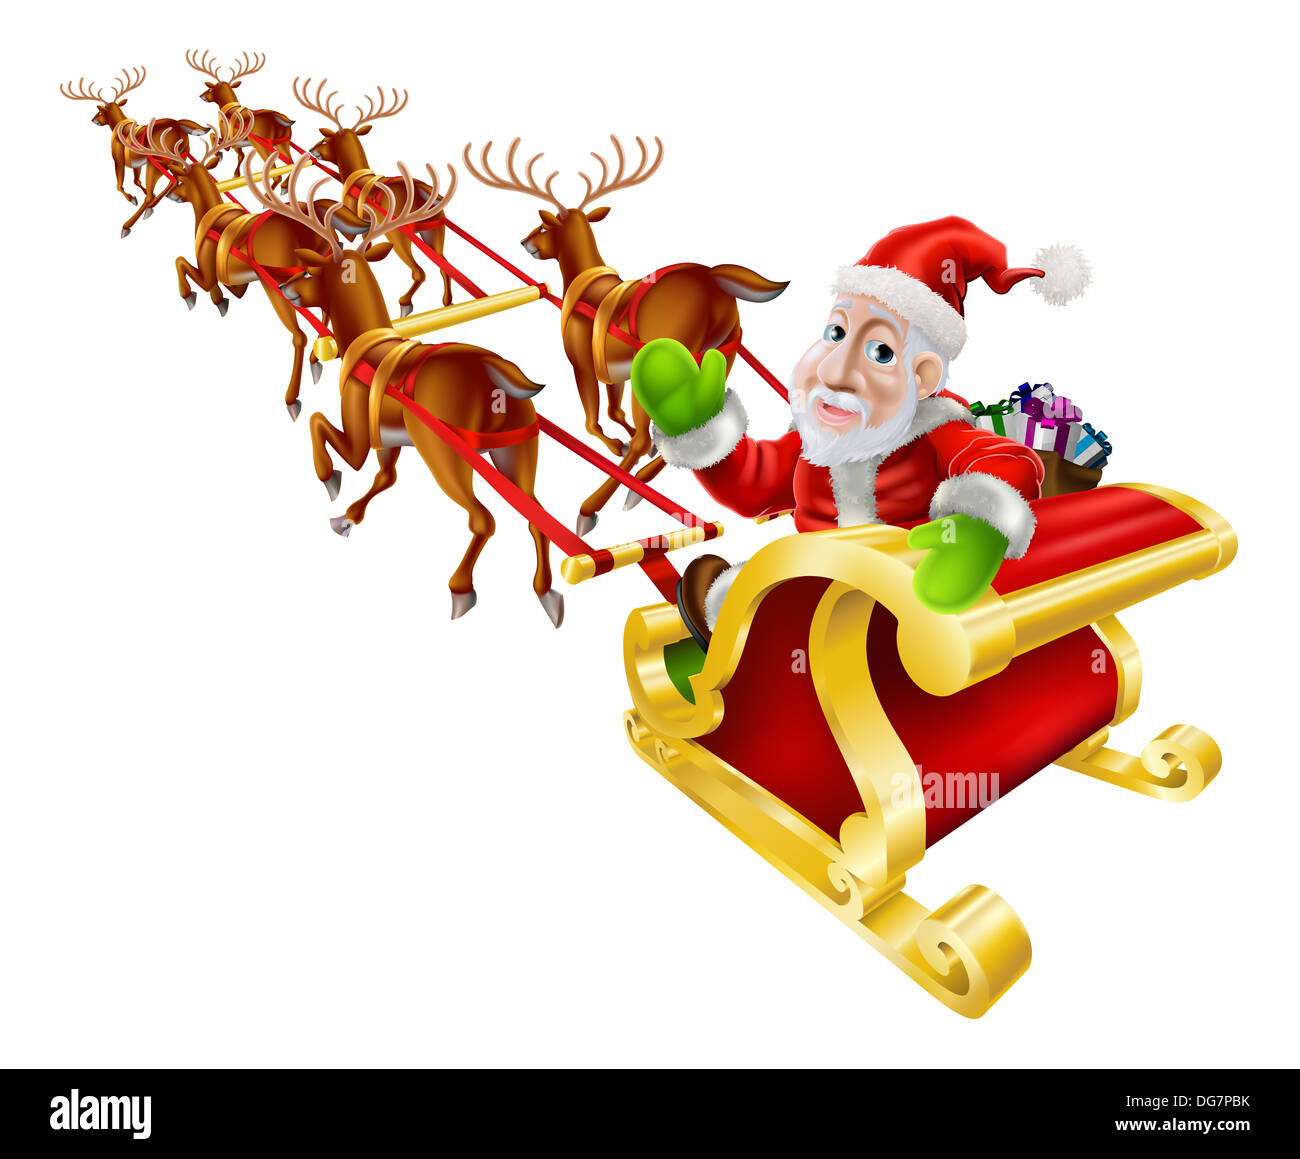 Cartoon Christmas illustration of Santa Claus flying in his sled or sleigh with reindeer and a sack of Christmas presents Stock Photo